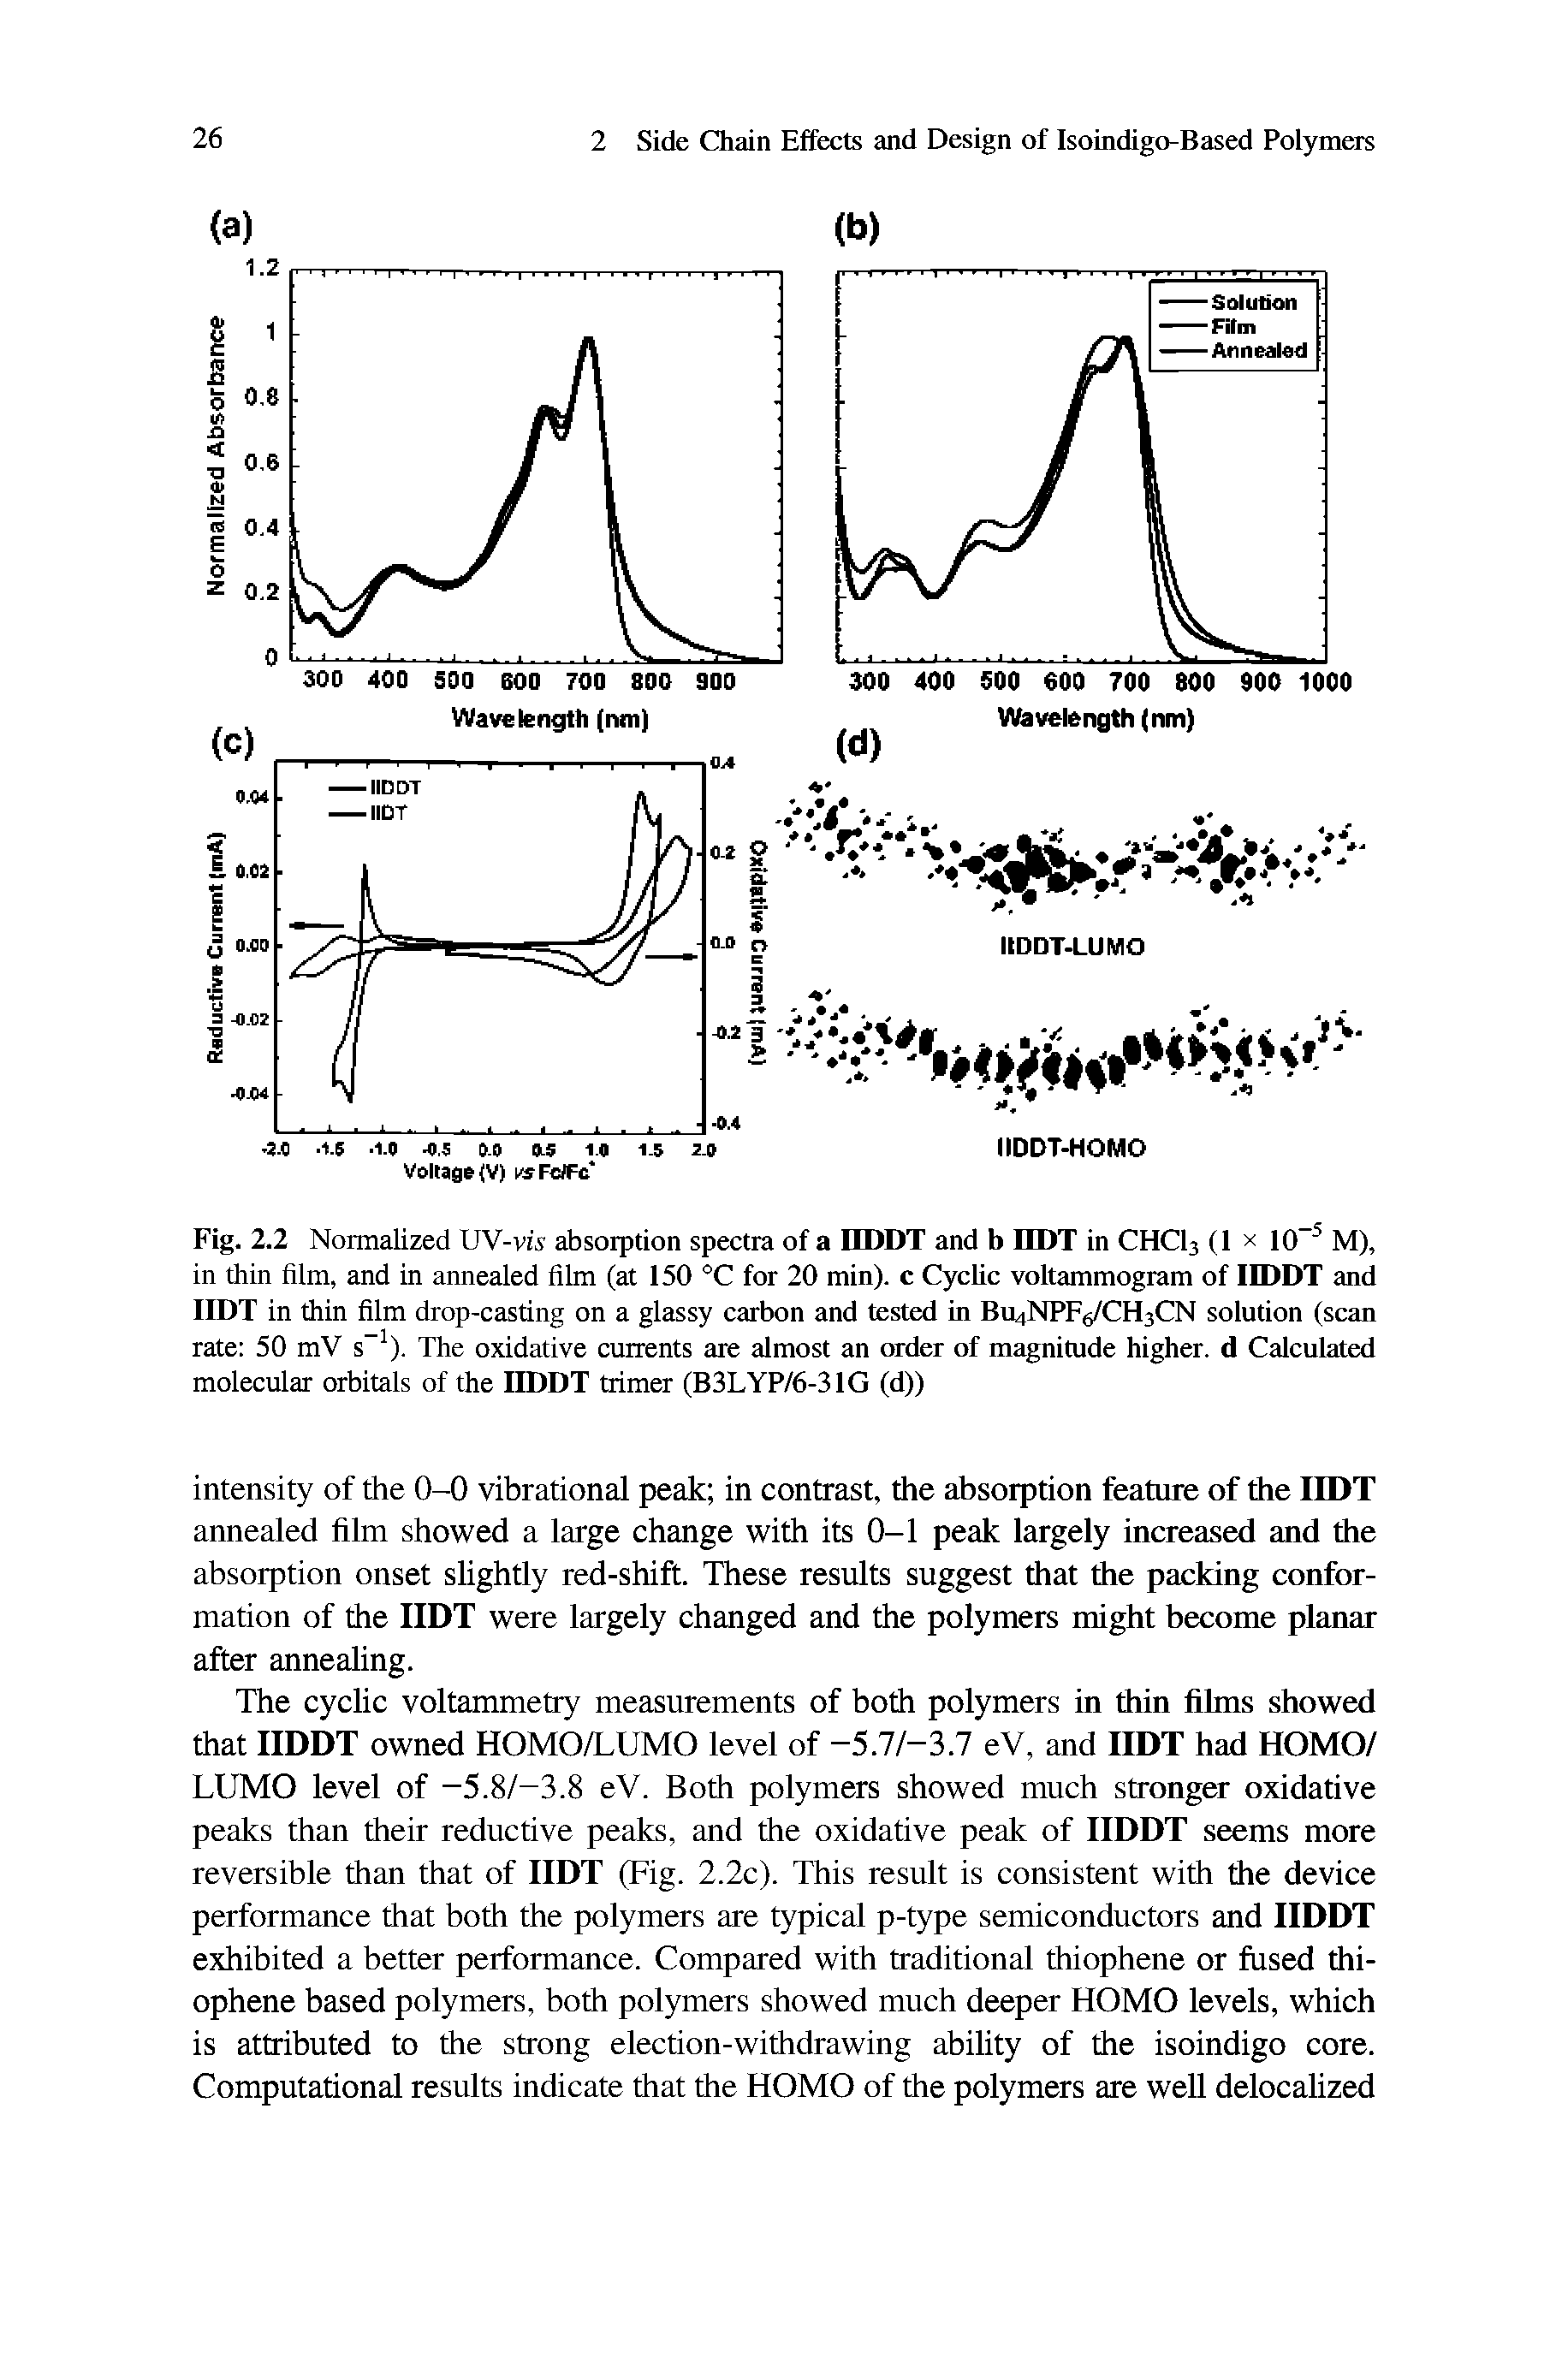 Fig. 2.2 Normalized UV-vi s absorption spectra of a IIDDT and b IIDT in CHCI3 (1 x 10 M), in thin film, and in annealed film (at 150 °C for 20 min), c Cyclic voltammogram of IIDDT and IIDT in thin film drop-casting on a glassy carbon and tested in BU4NPF6/CH3CN solution (scan rate 50 mV s ). The oxidative currents are almost an order of magnitude higher, d Calculated molecular orbitals of the IIDDT trimer (B3LYP/6-31G (d))...